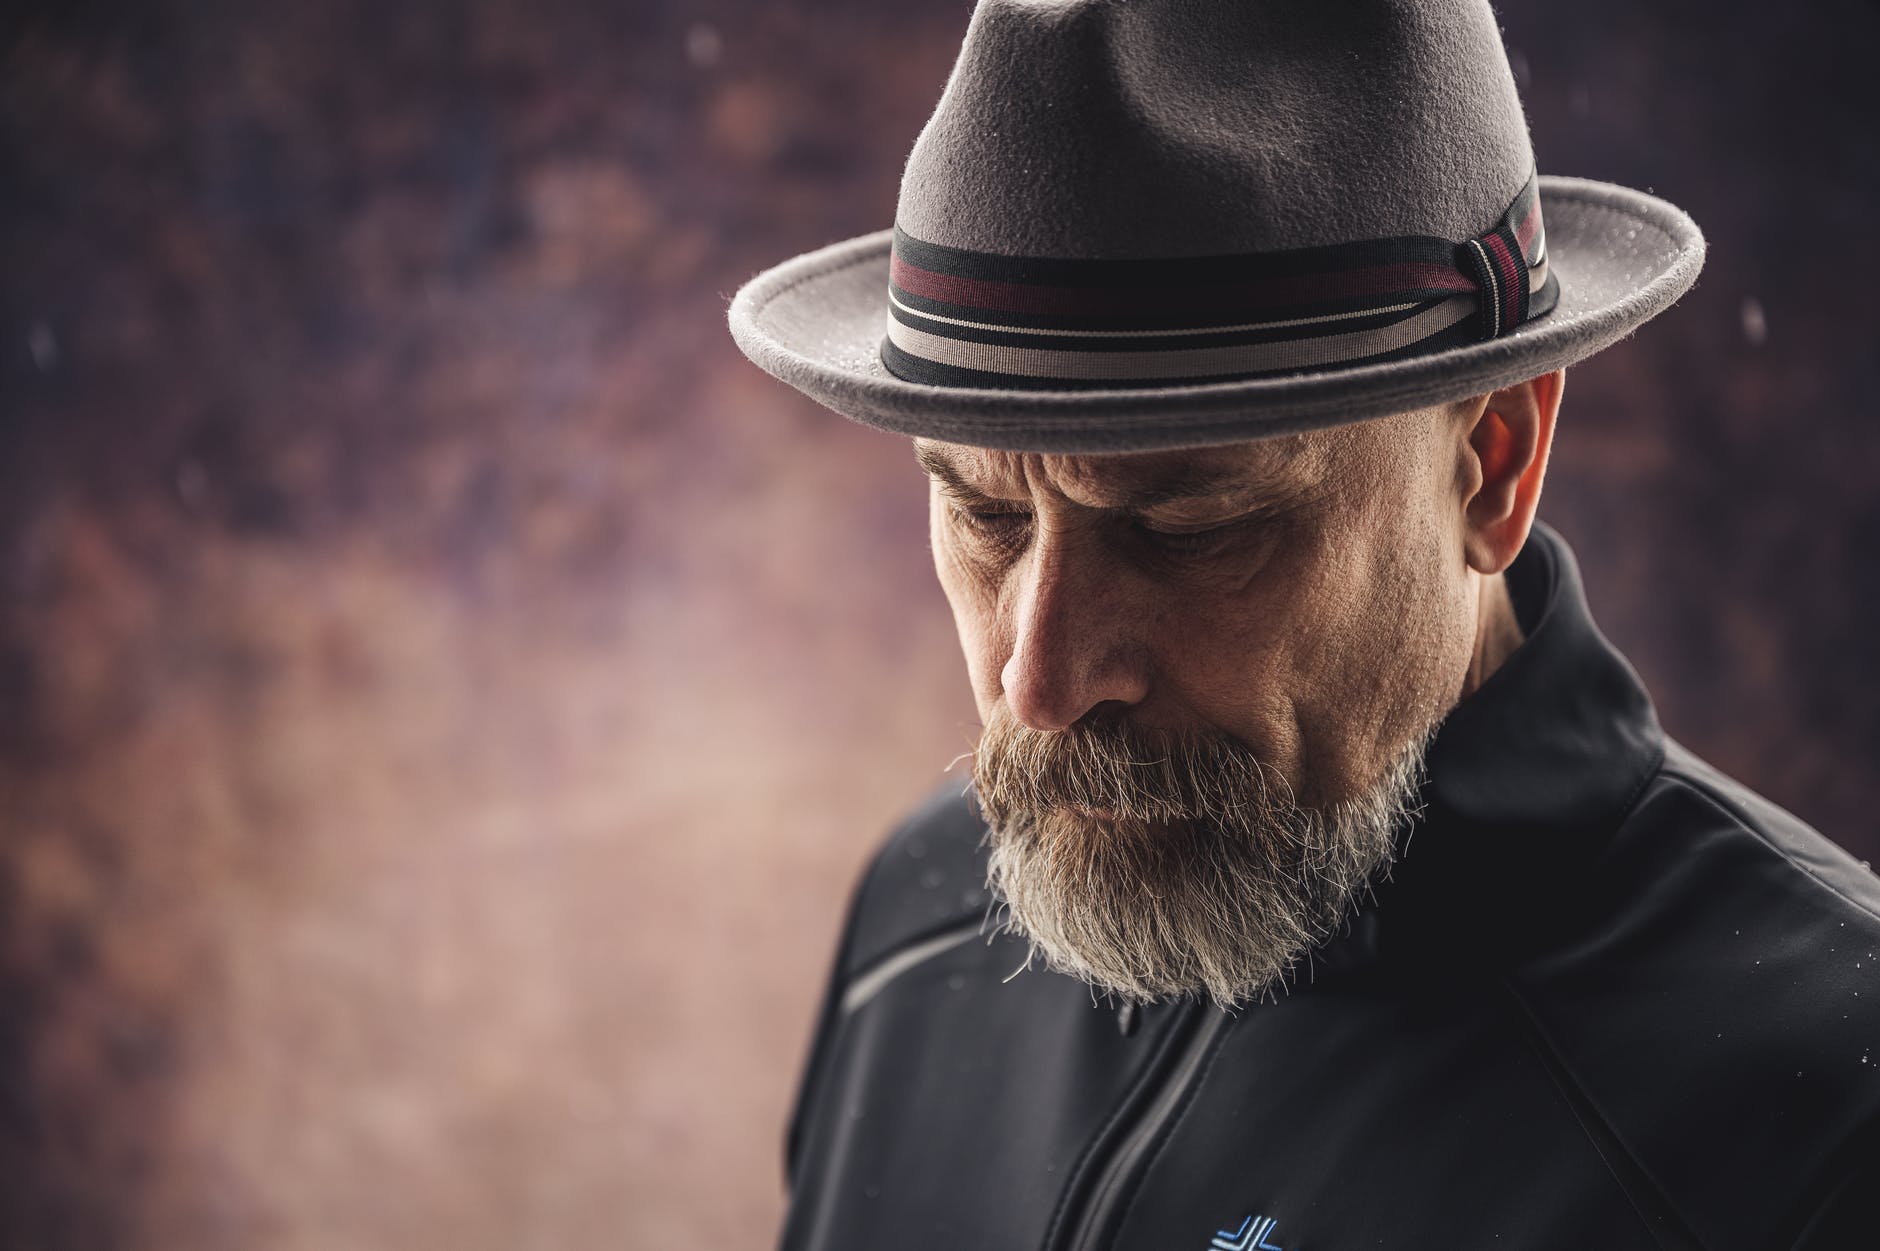 A bearded man with a hat | Source: Pexels